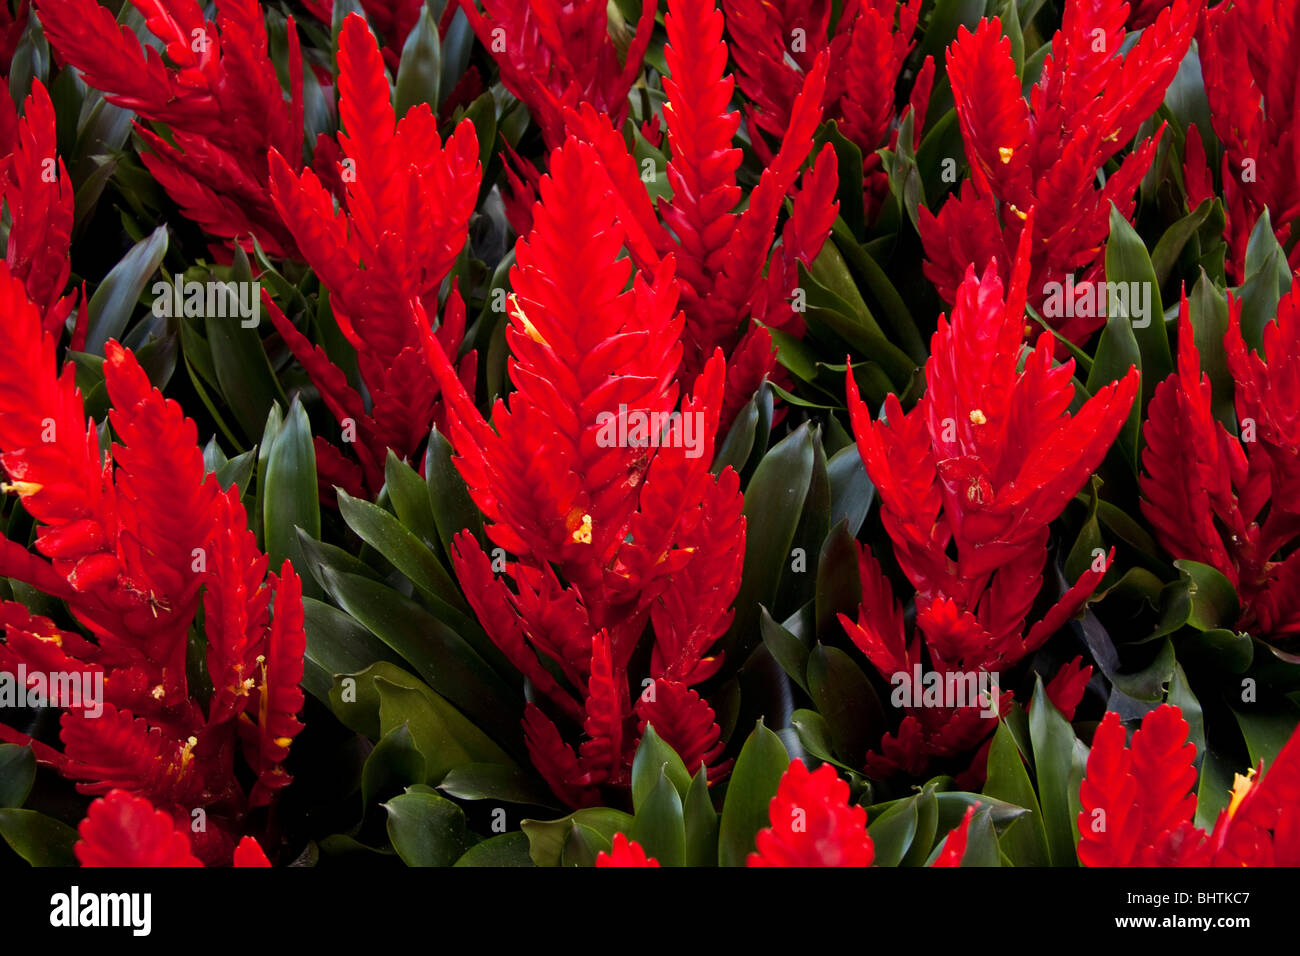 flaming red plants at the farmers market Stock Photo